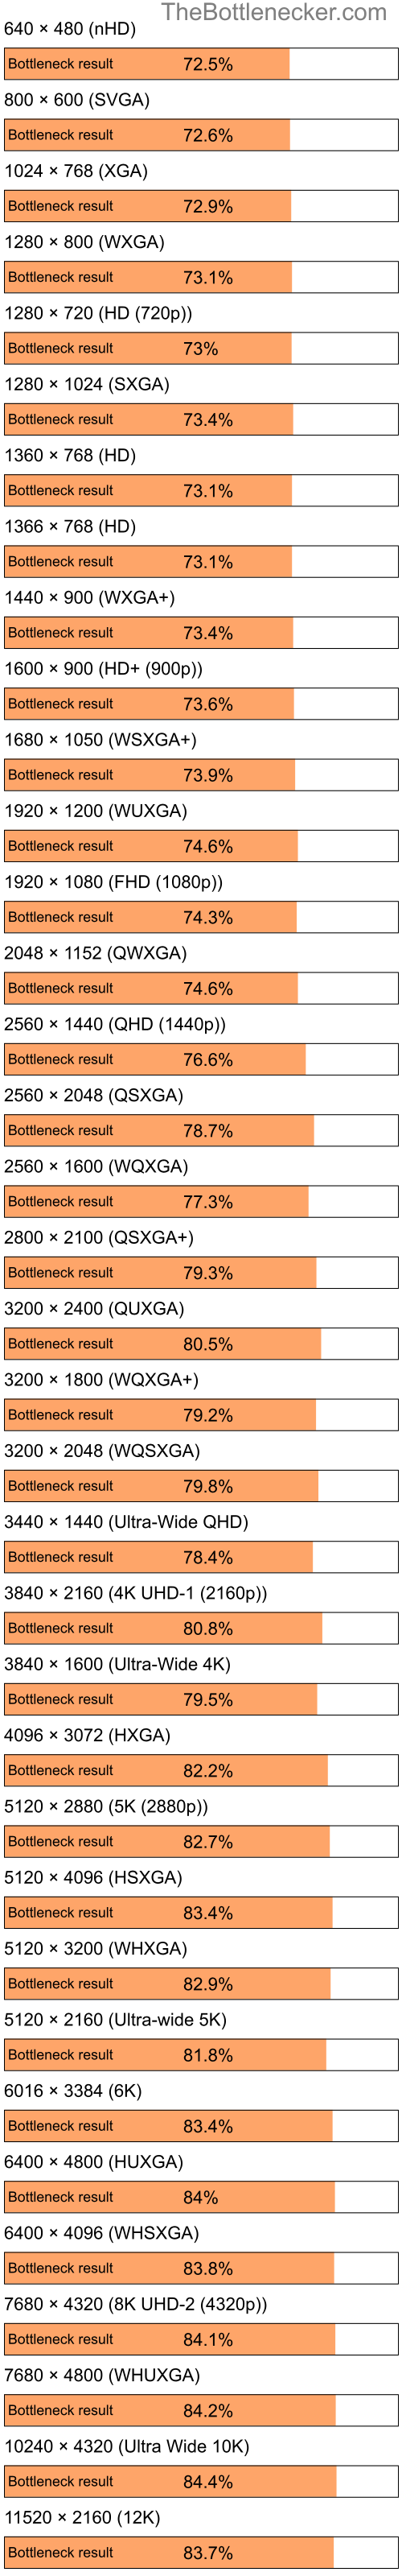 Bottleneck results by resolution for Intel Pentium 4 and AMD Radeon 9550 in Processor Intense Tasks